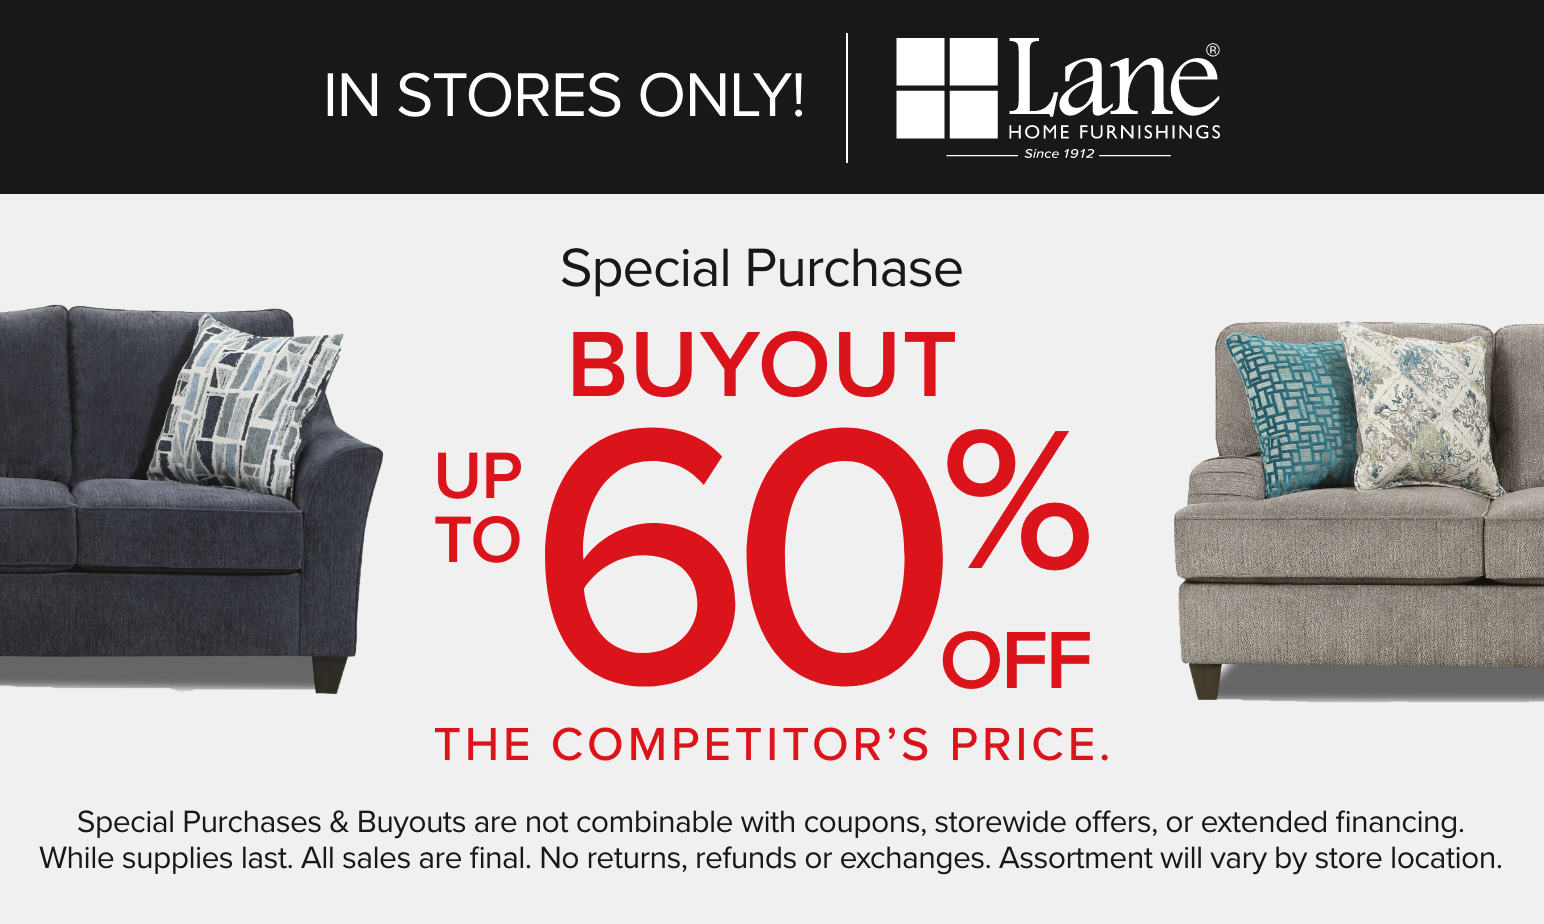 In Stores Only! Lane Special Purchase Buyout up to 60% off the competitors price. Special purchases & buyouts are not combinable with coupons, storewide offers, or extended financing. While supplies last. All sales are final. No returns, refunds or exchanges. Assortment will vary by store locations.